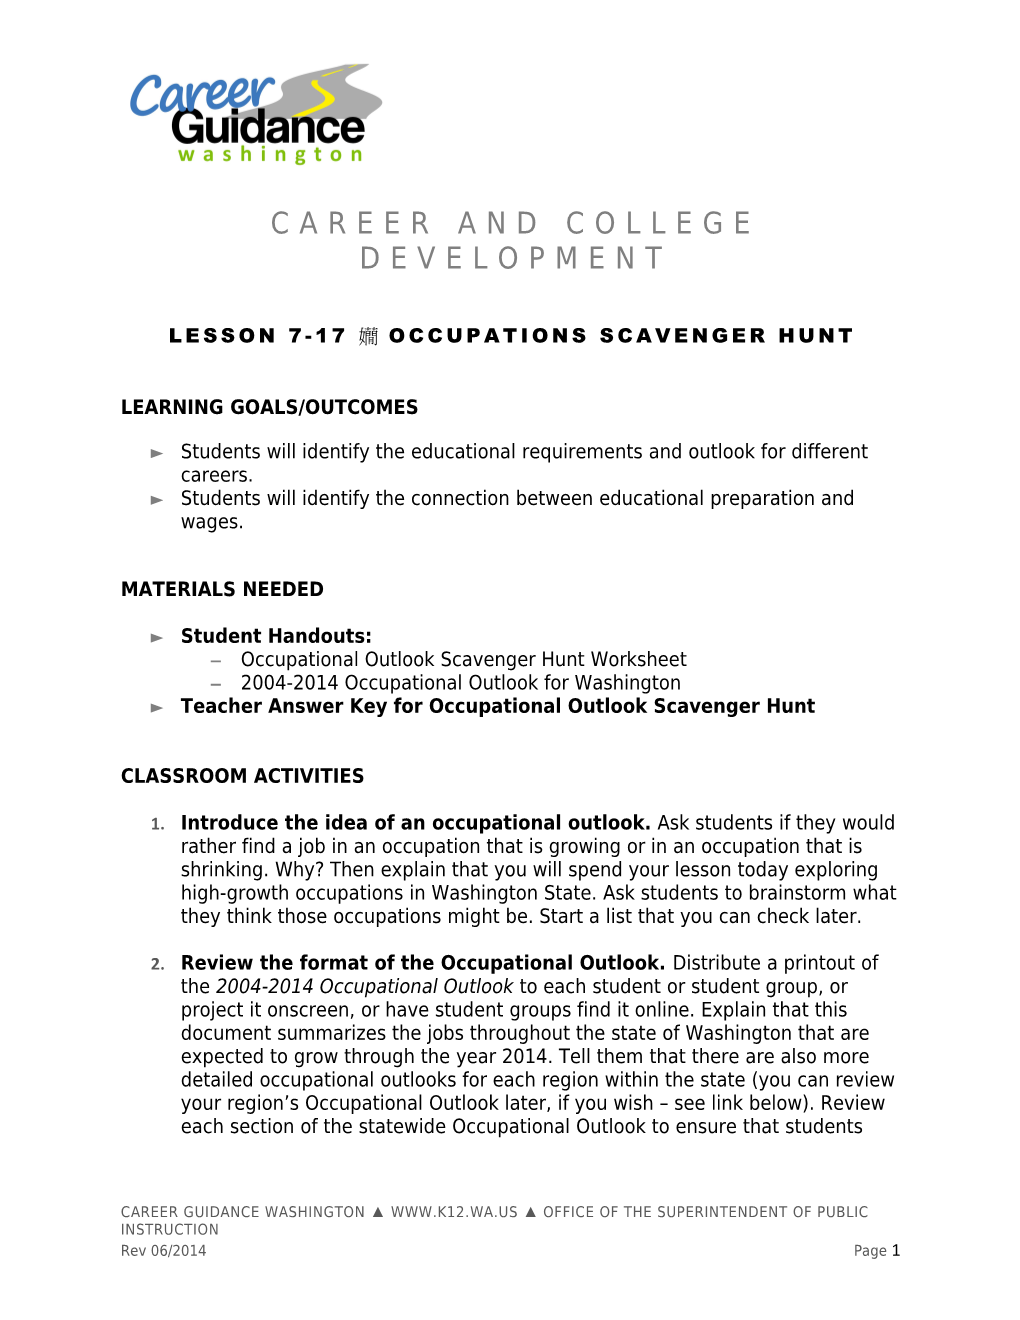 Career and College Development